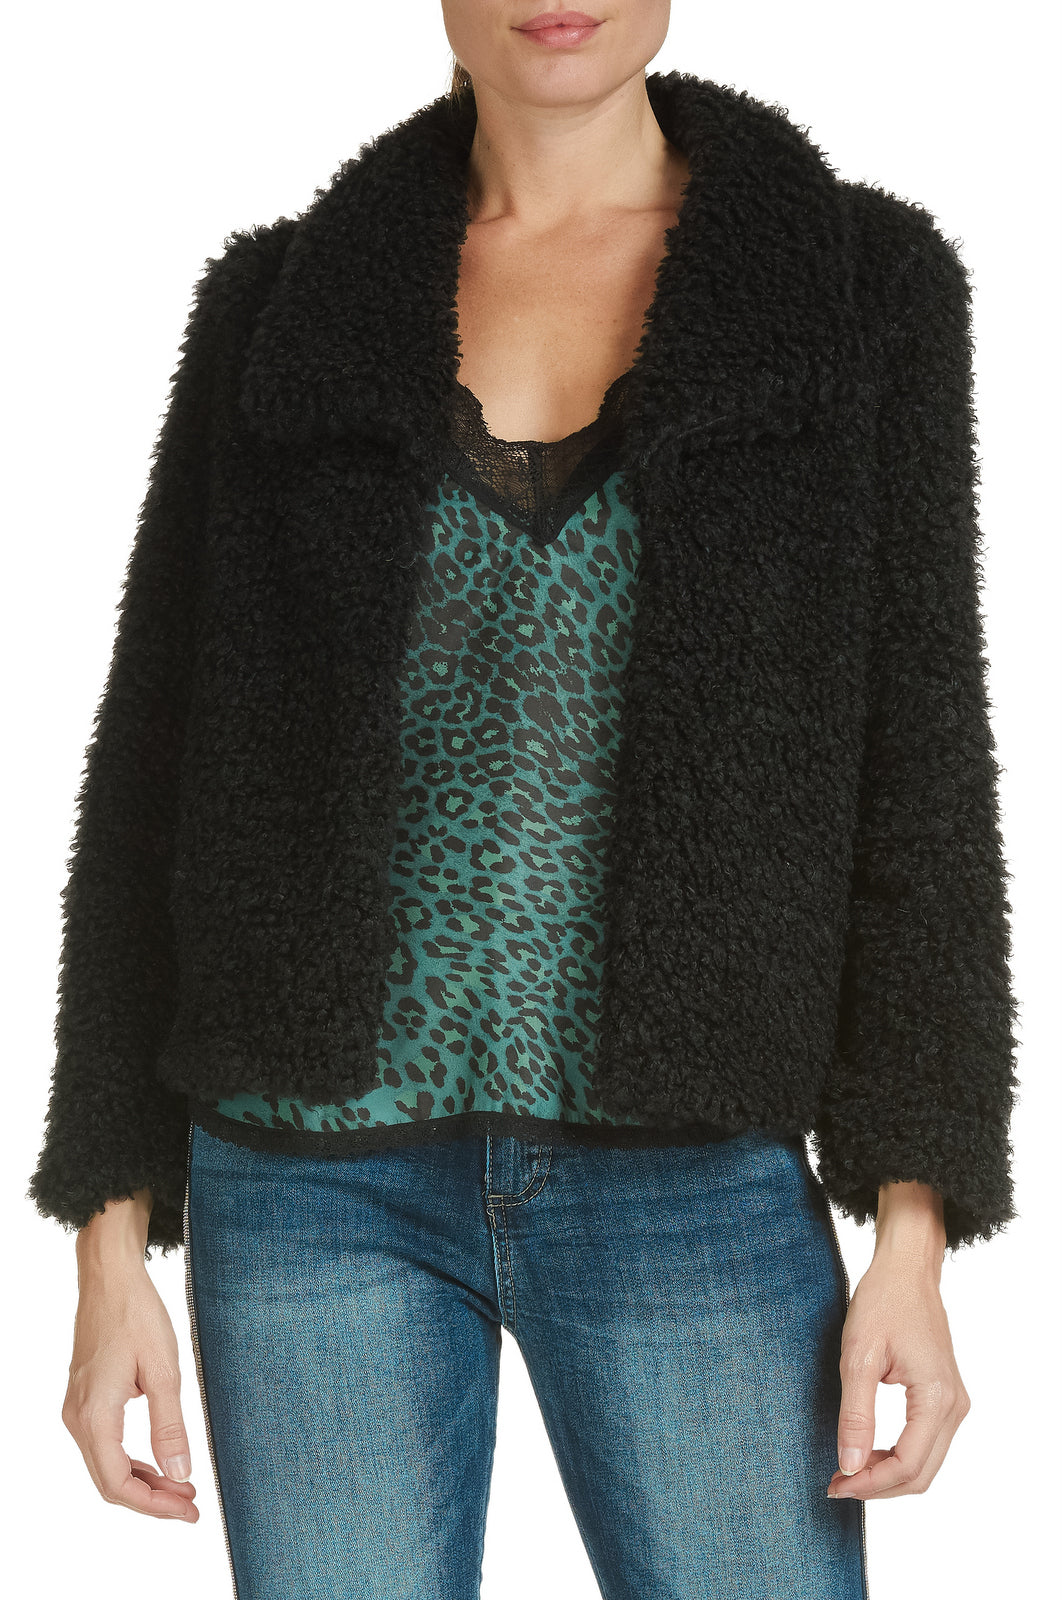 Shaggy Jacket with Front Snap